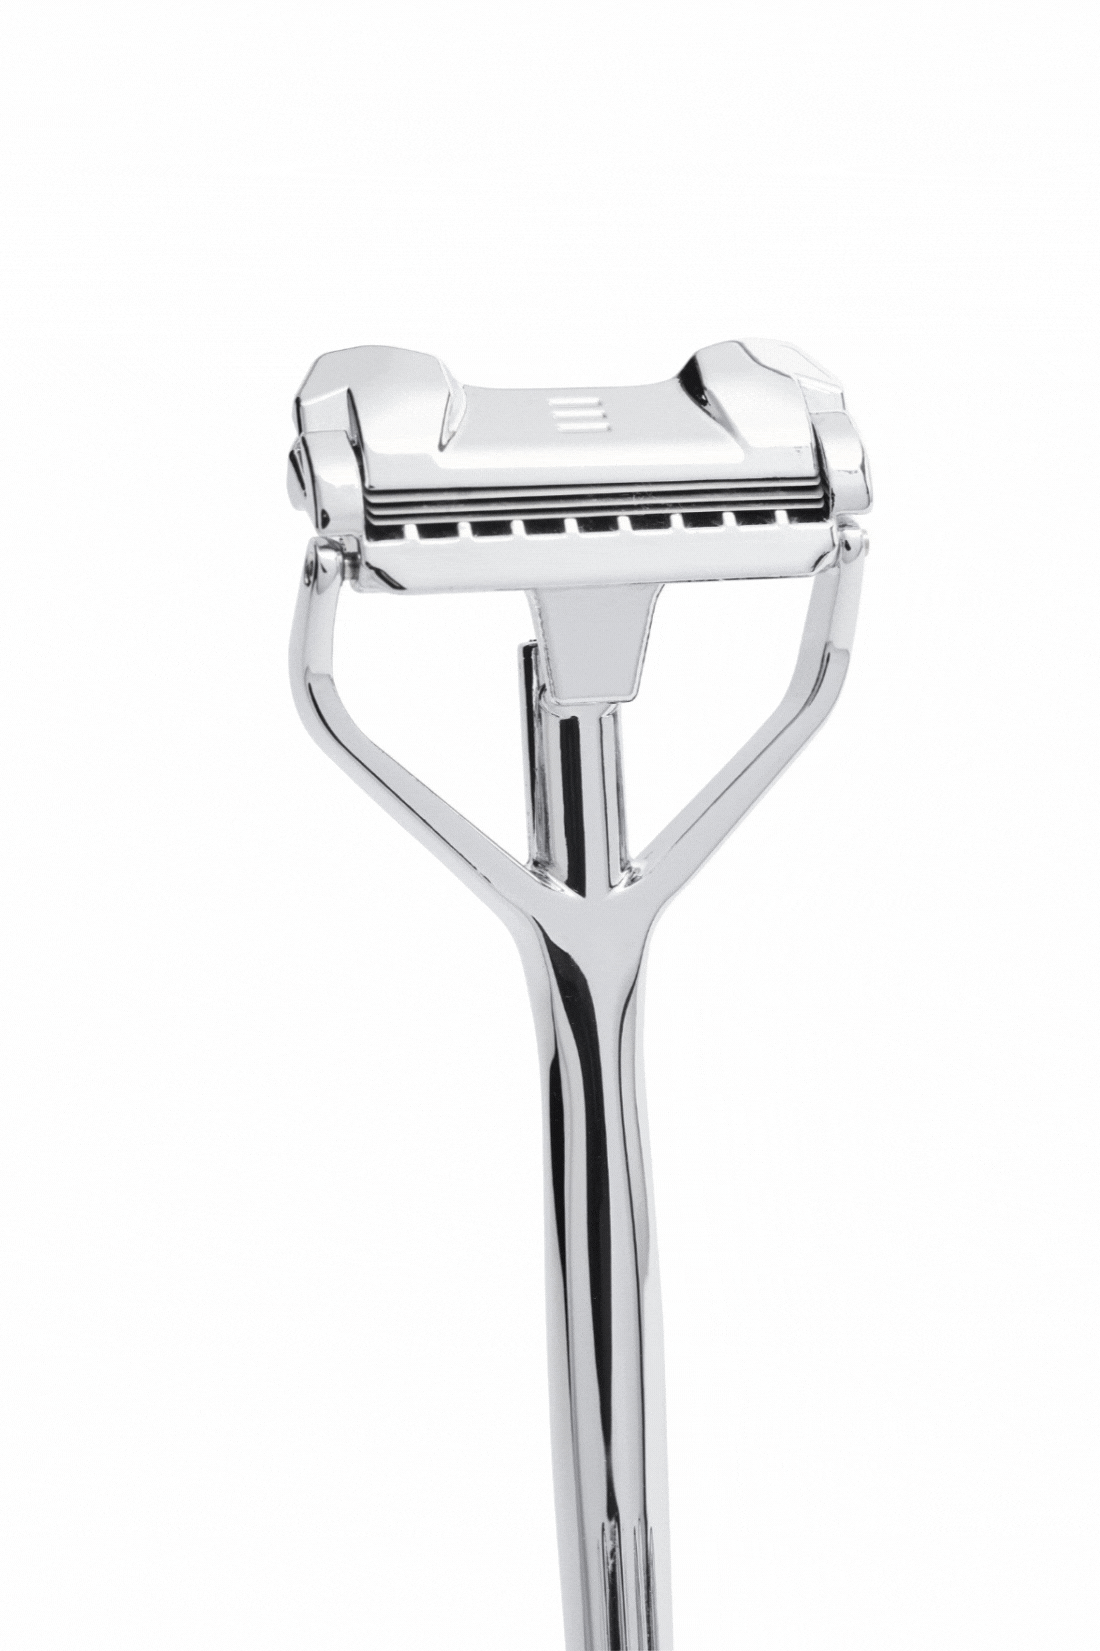 SHAVENT - gentle, plastic-free shaving with flexible head, Made in ...